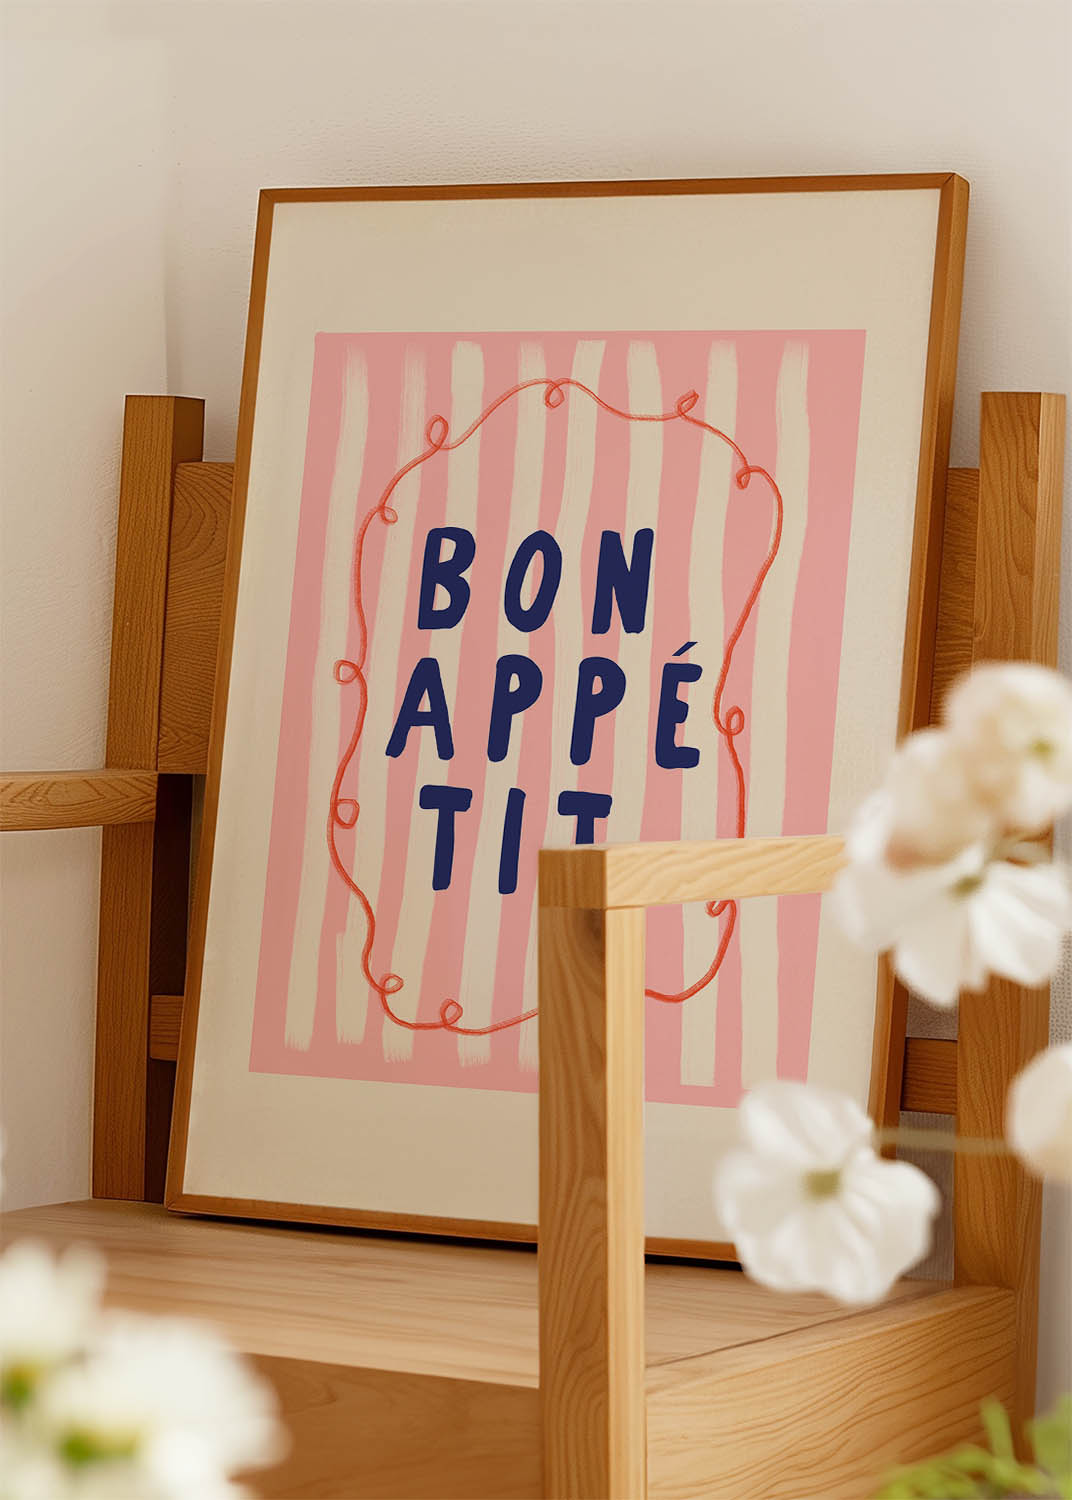 A poster with a light pink background featuring the phrase "Bon Appétit" in the center in large, dark blue letters. The background has a subtle white brushstroke pattern, and a whimsical orange line mimics the outline of an ornate frame, looping around the phrase playfully.